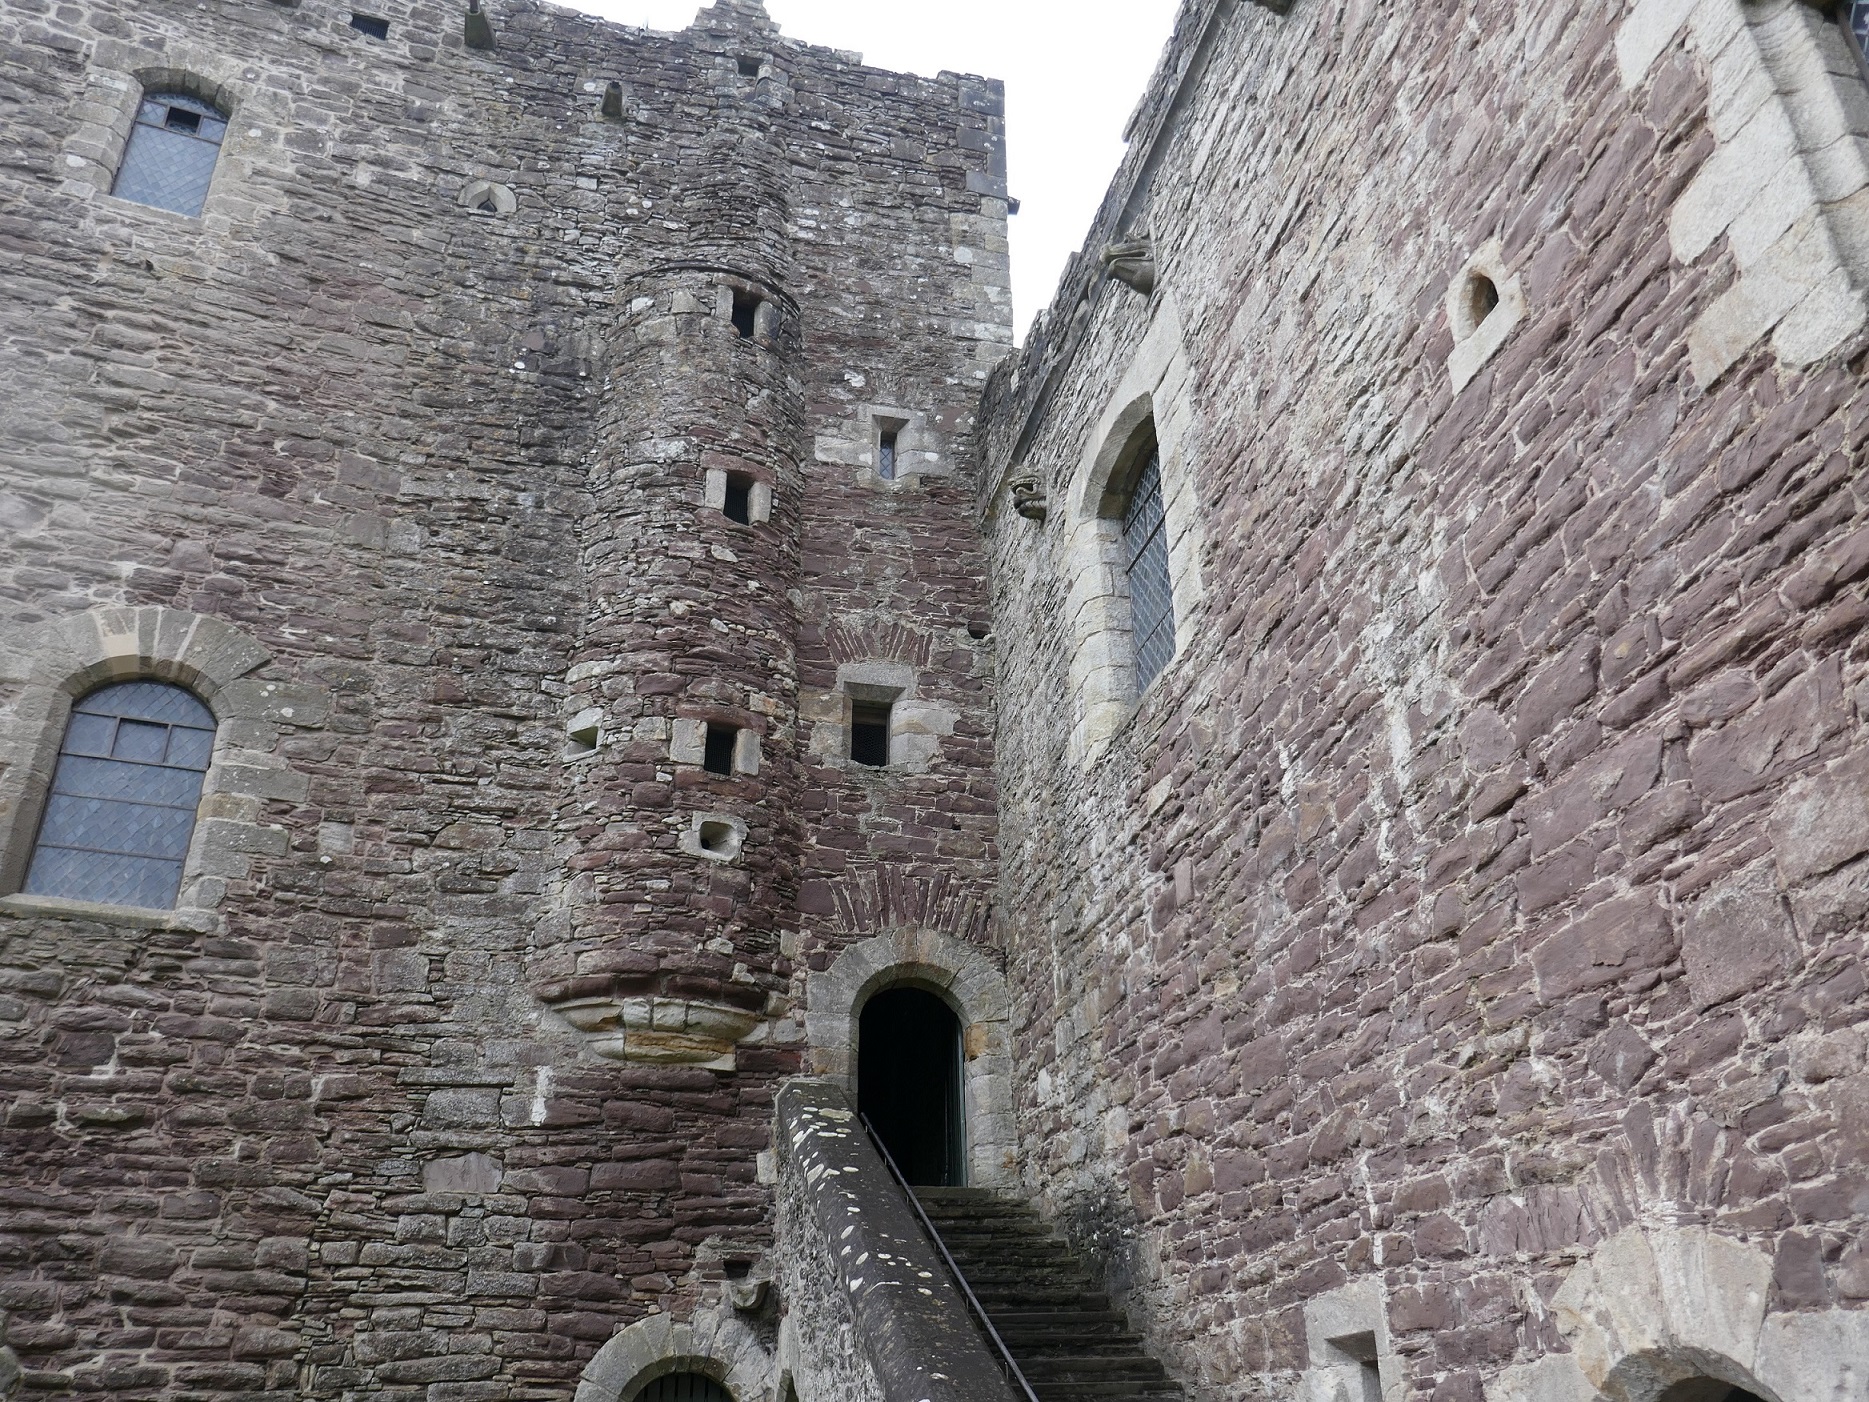 A close-up of Doune Castle with a staircase leading to the entrance